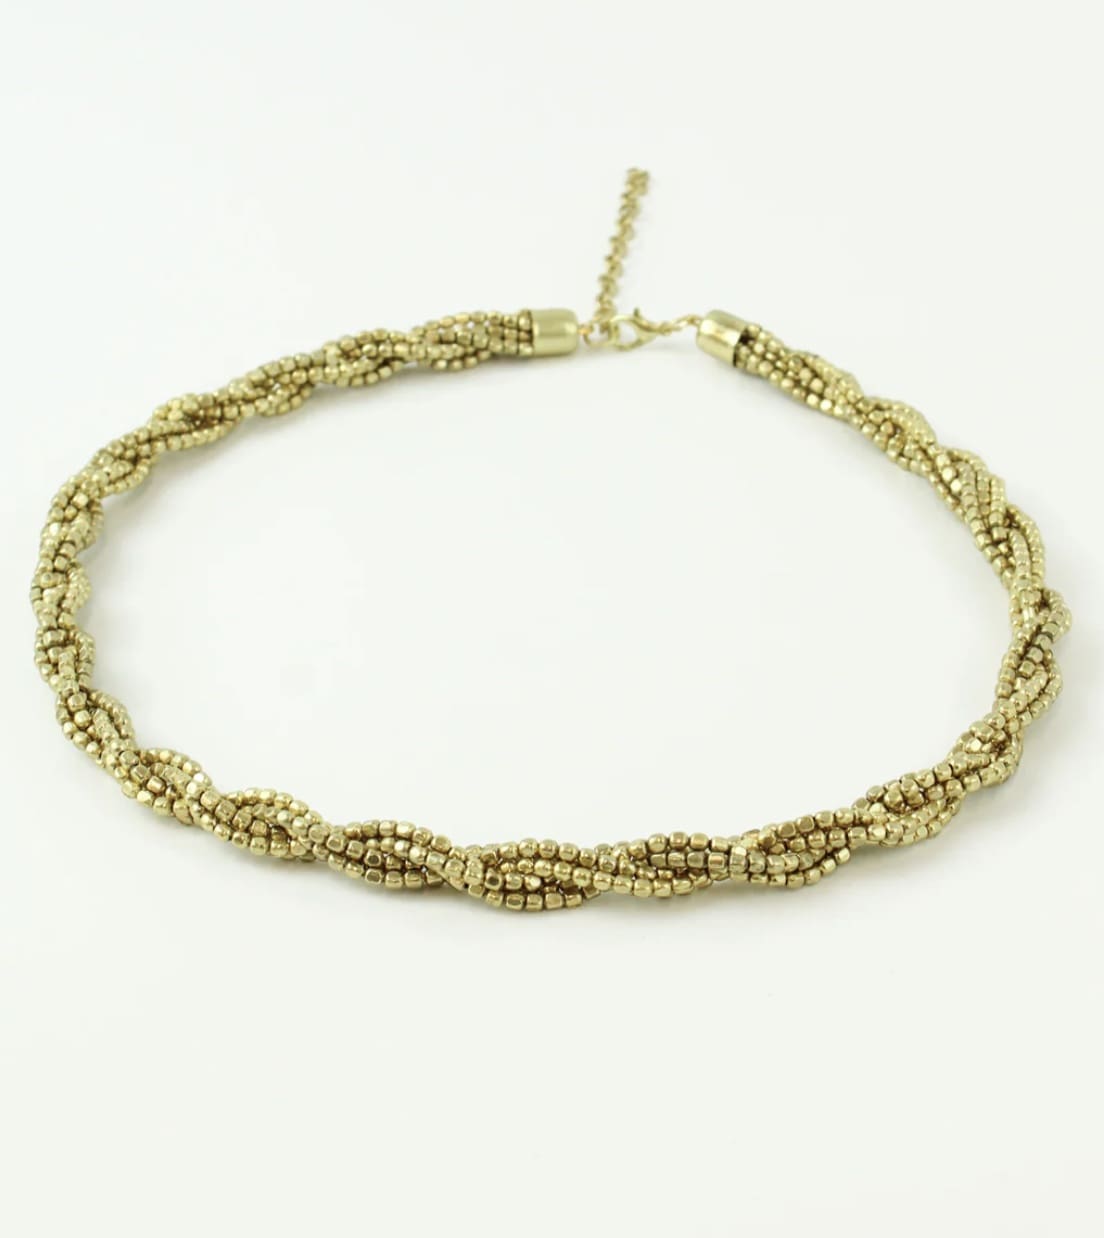 A gold braided choker on a white background.